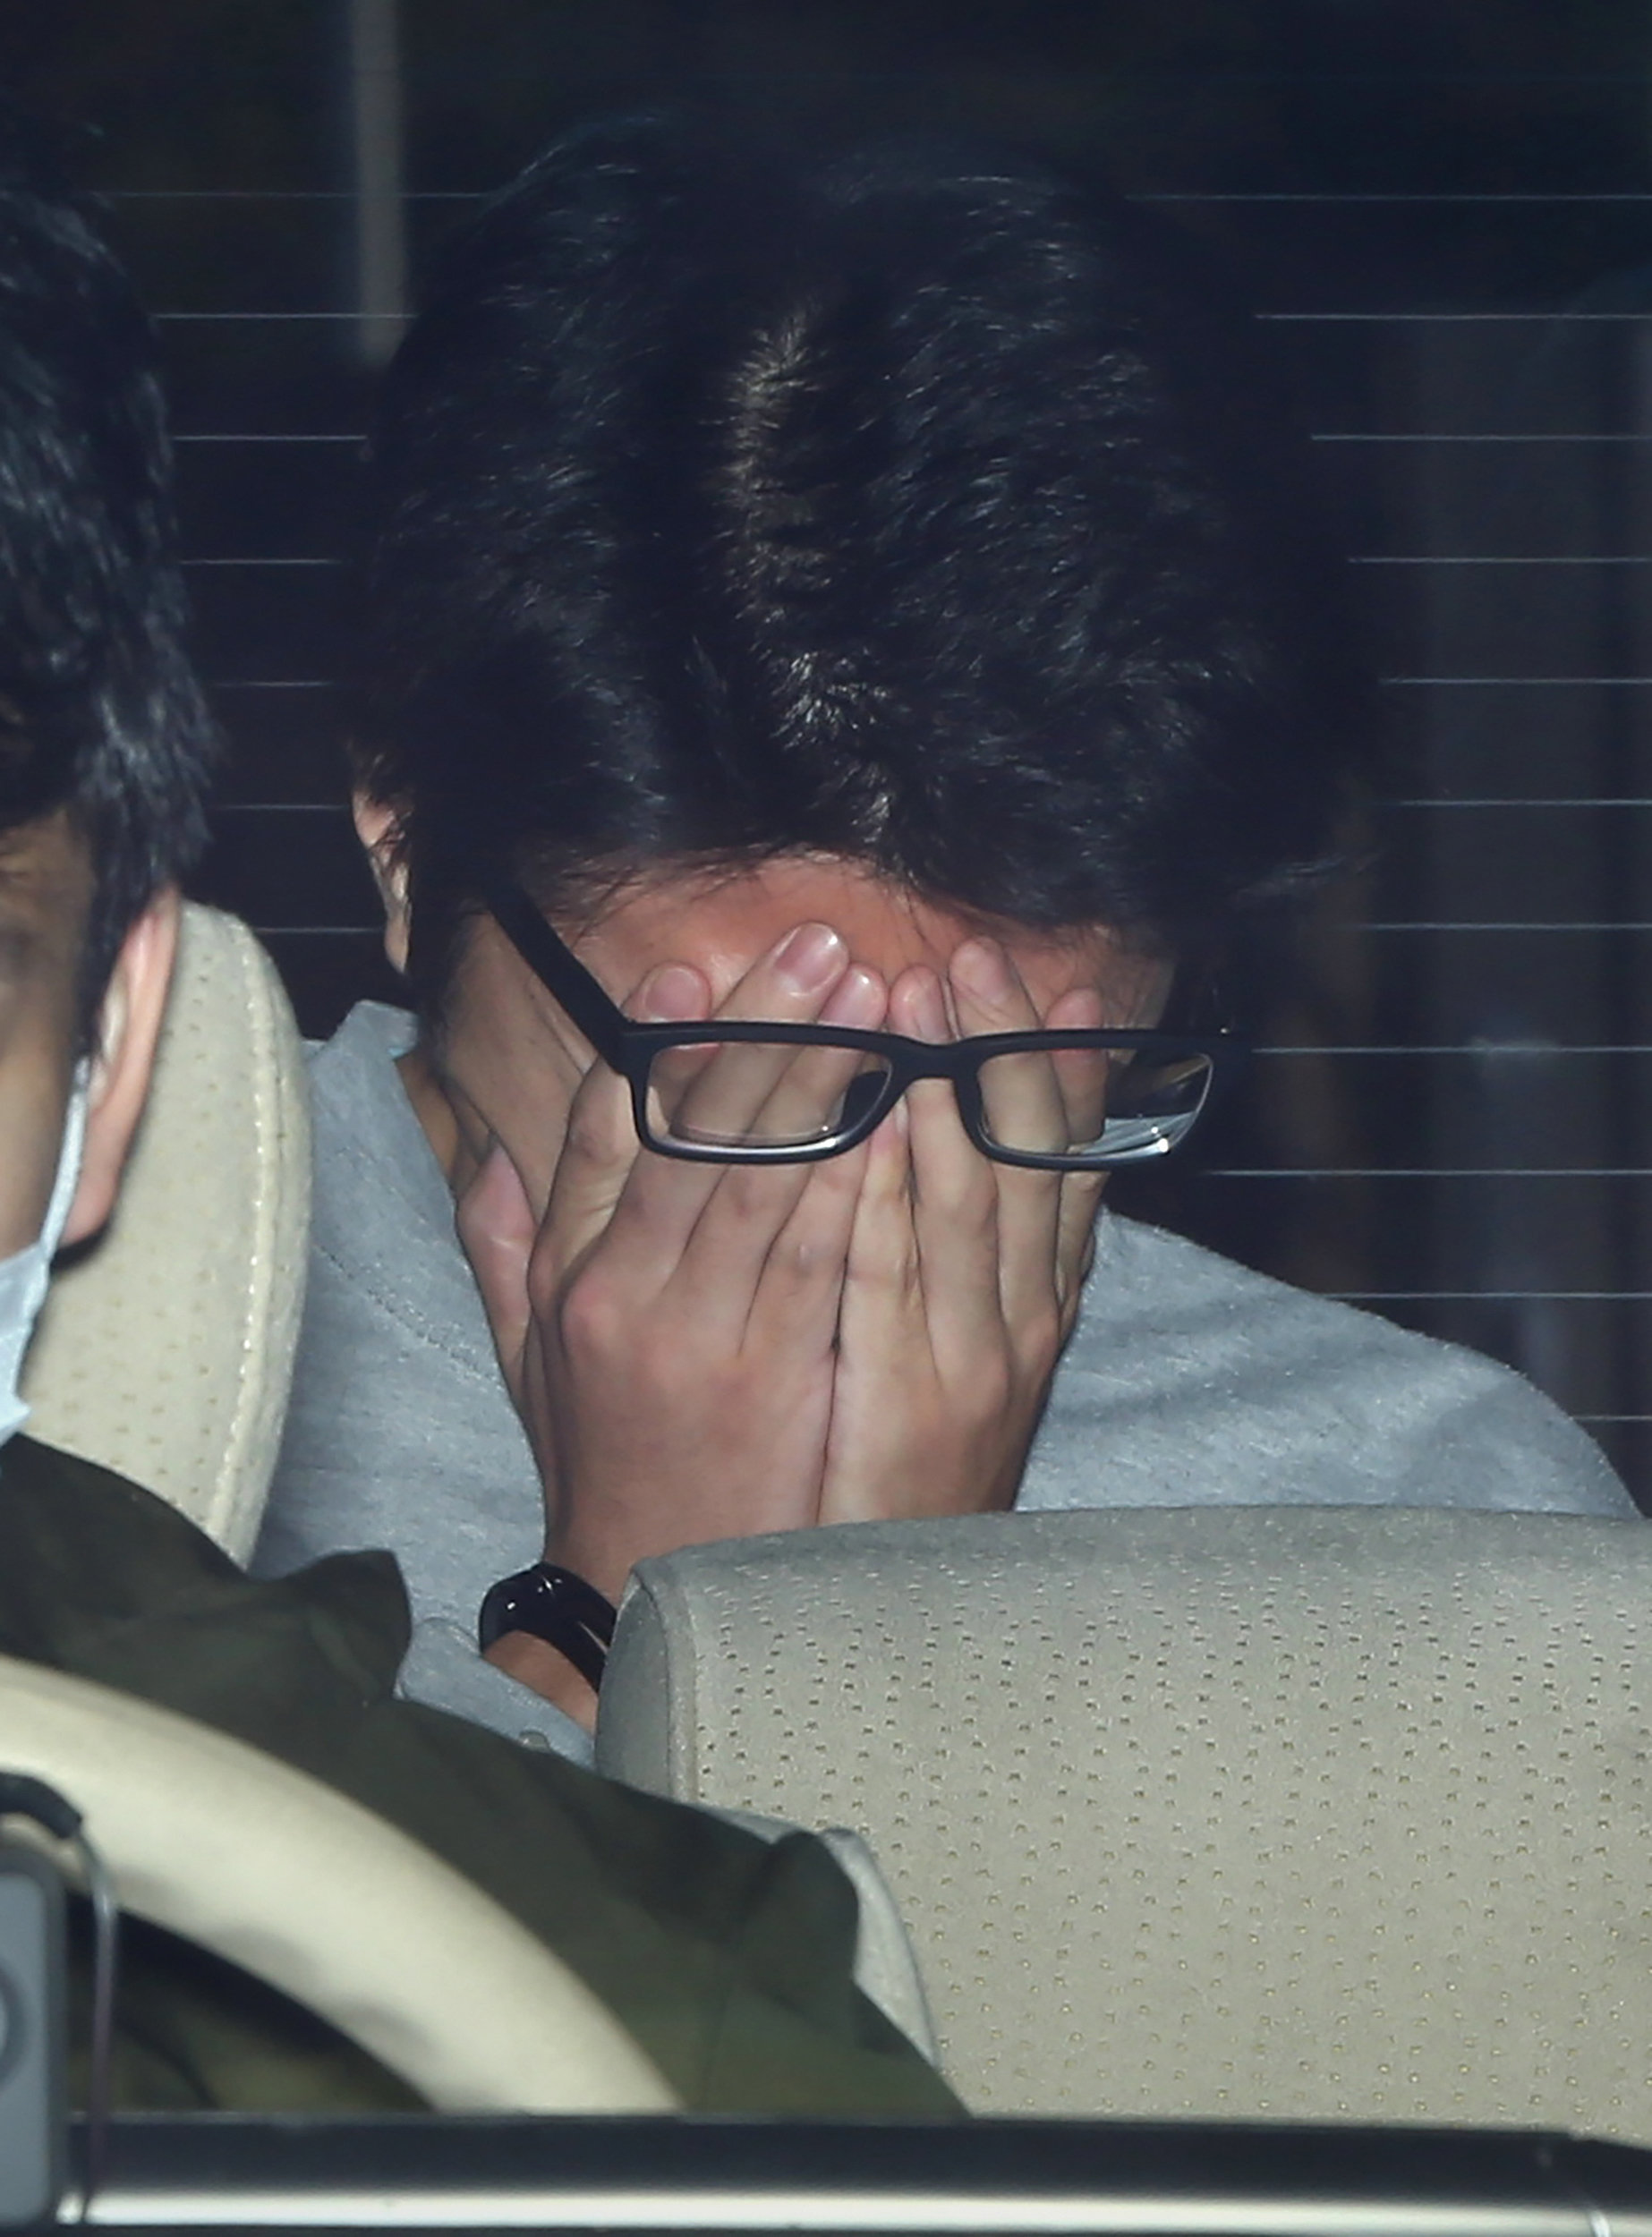 <strong>Suspect Takahiro Shiraishi covers his face with his hands as he is transported to the prosecutor's office from a police station in Tokyo on 1 November&nbsp;</strong>